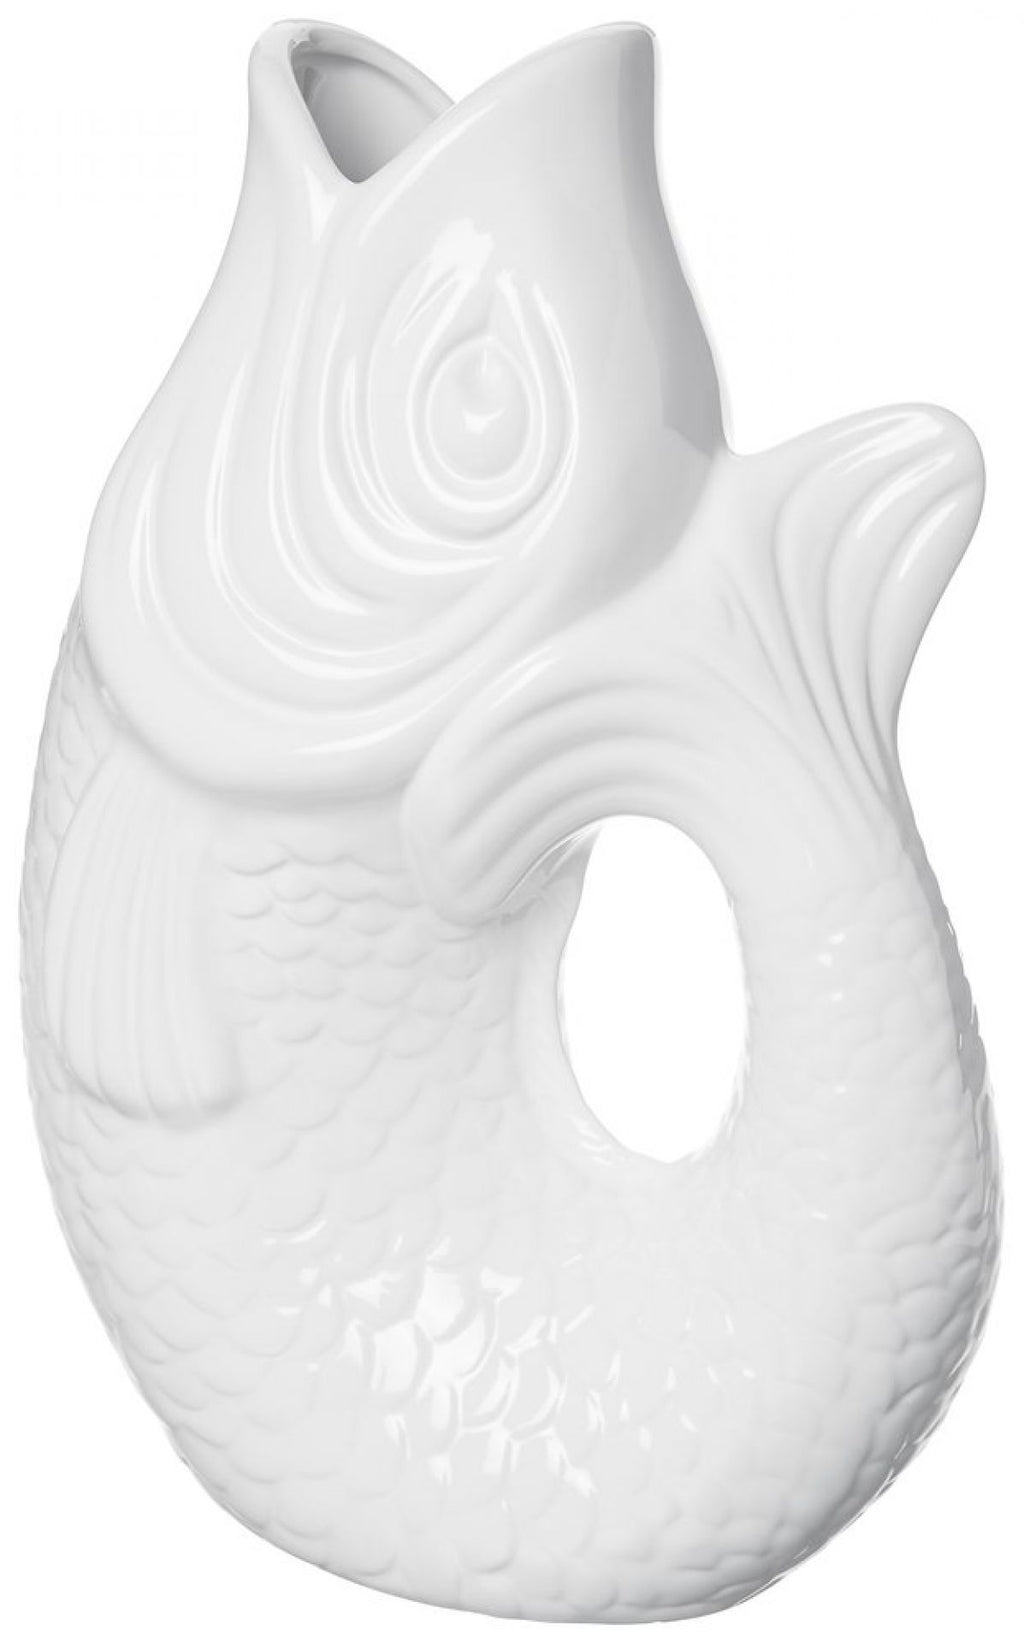 GIFTCOMPANY MONSIEUR CARAFON, FISCH, VASE, L, WEISS, 2,7l